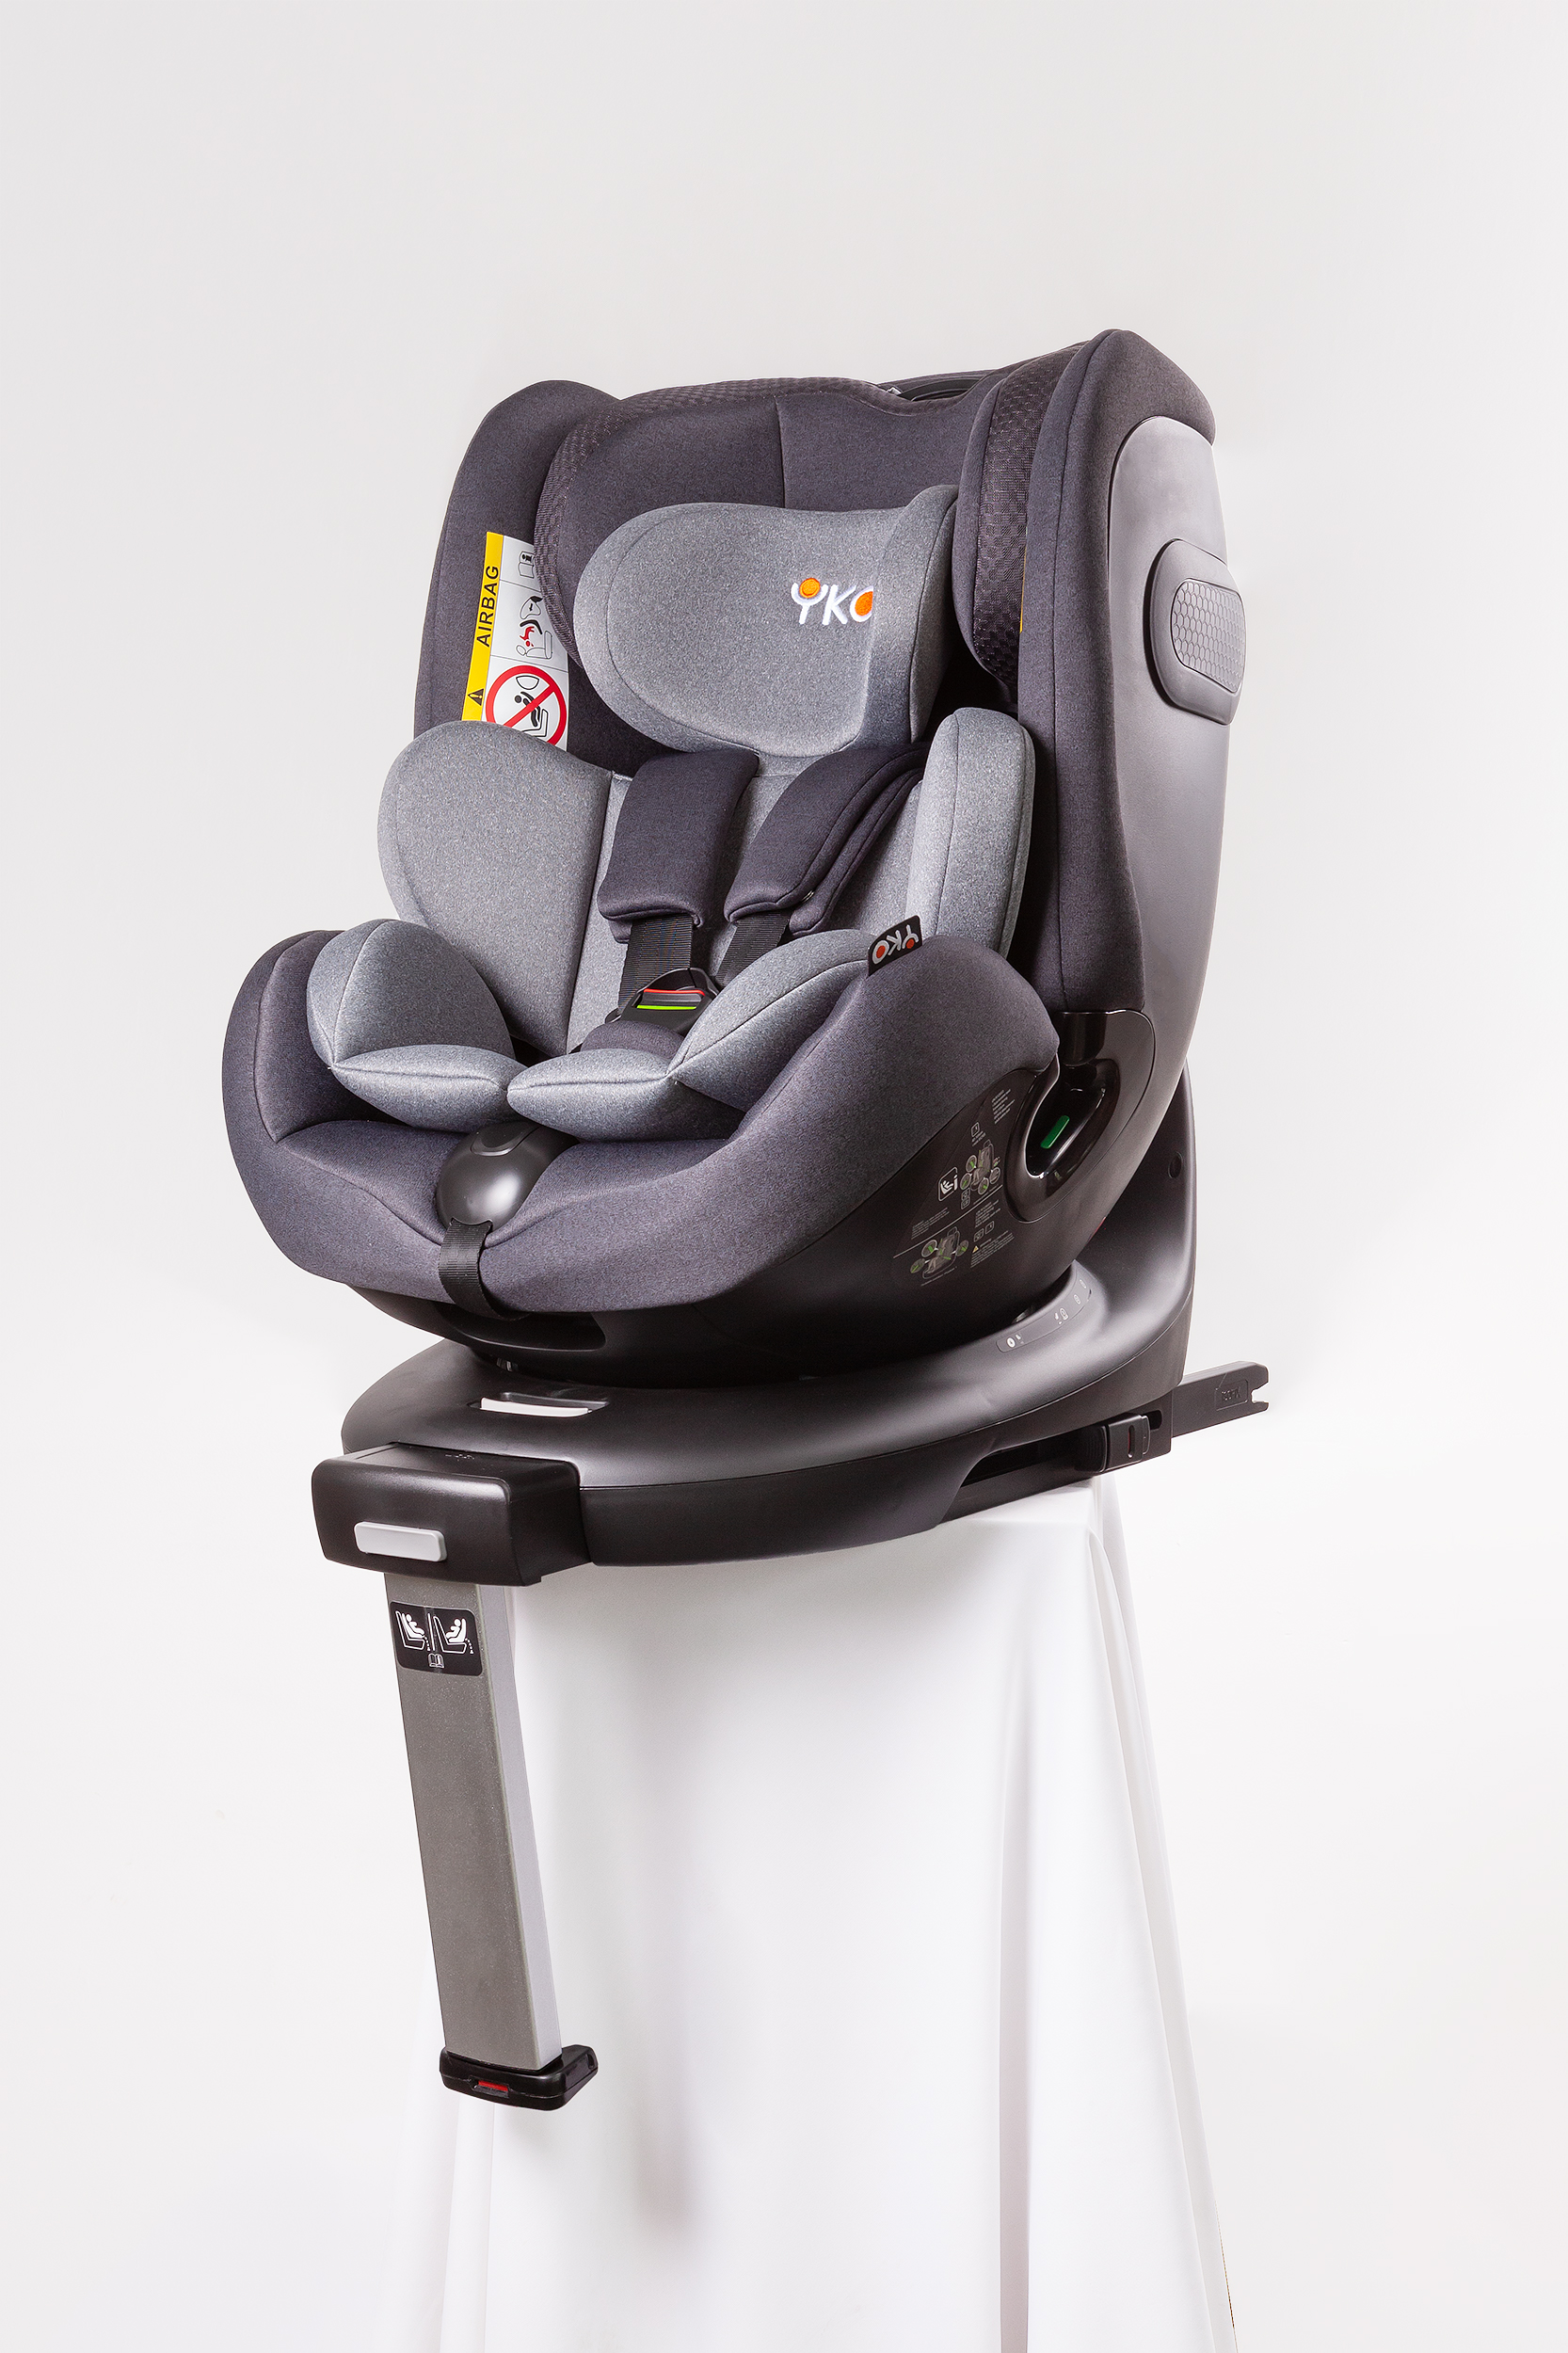 factory sell infant car seat